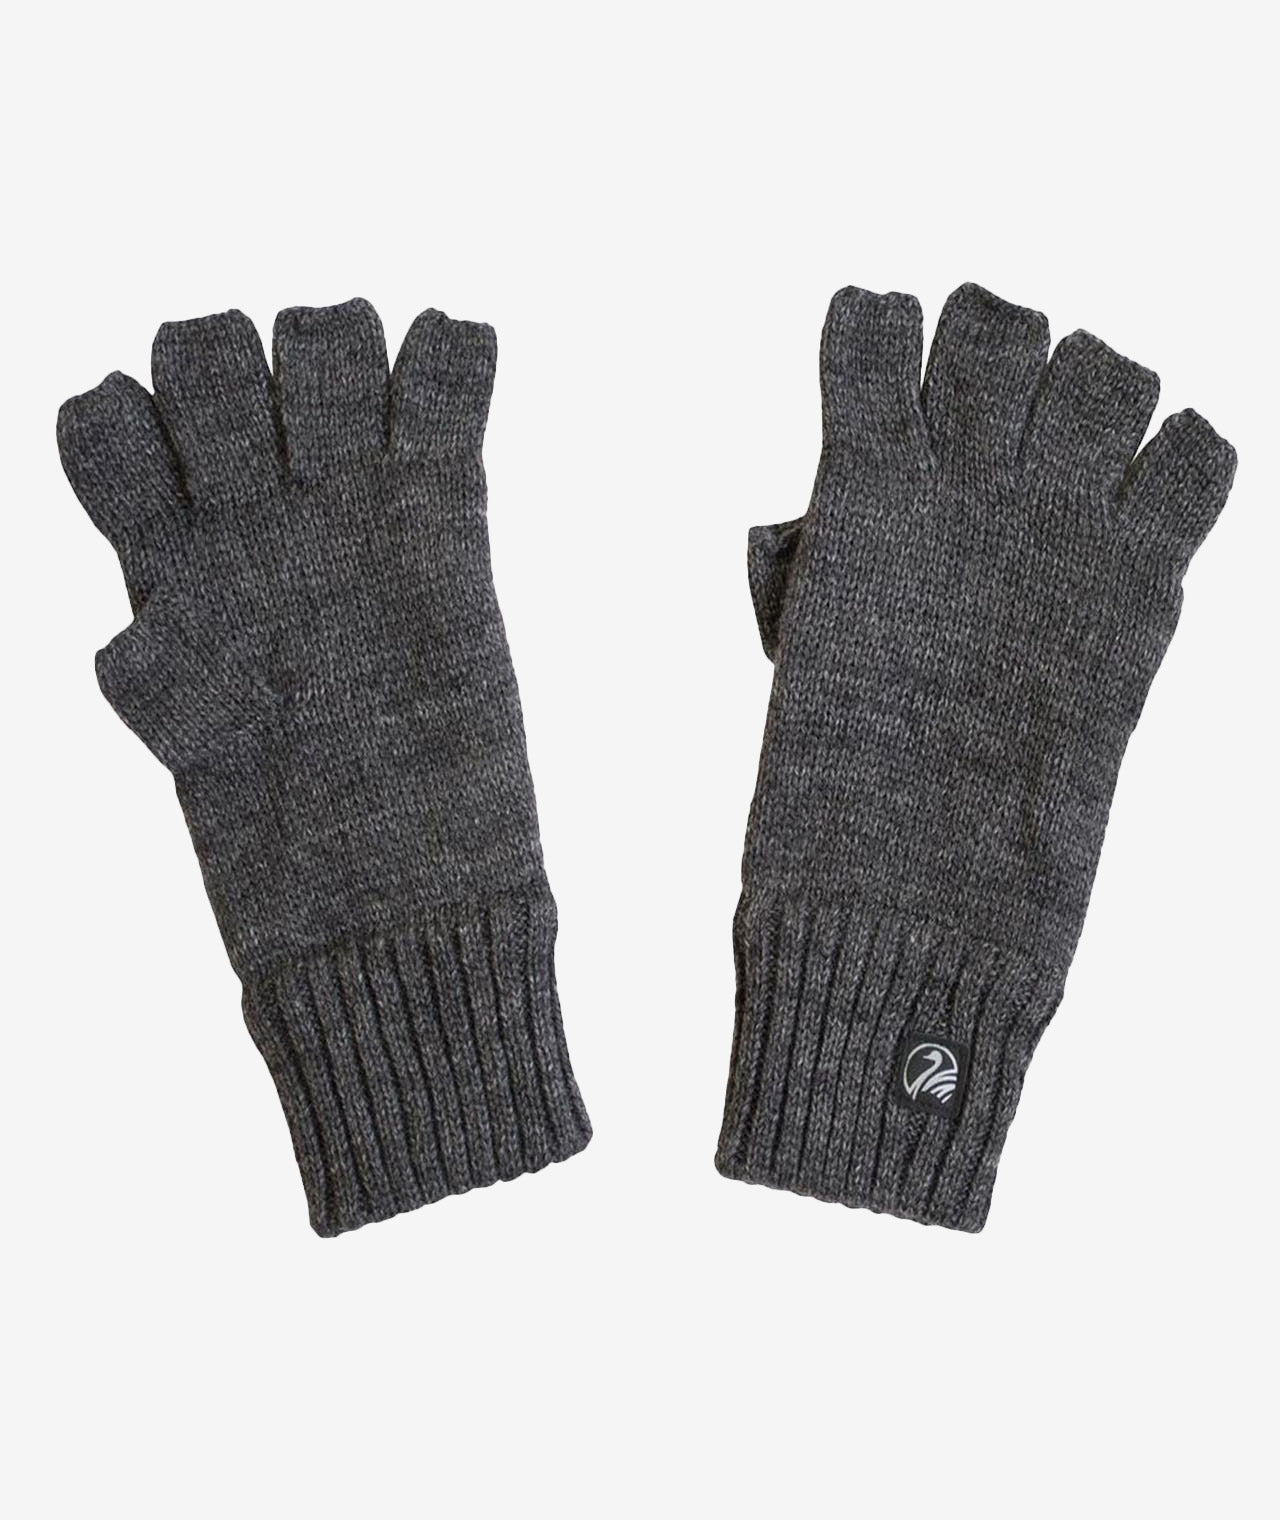 Swanndri Fingerless Gloves - L-XL / CHARCOAL MARLE - Mansfield Hunting & Fishing - Products to prepare for Corona Virus